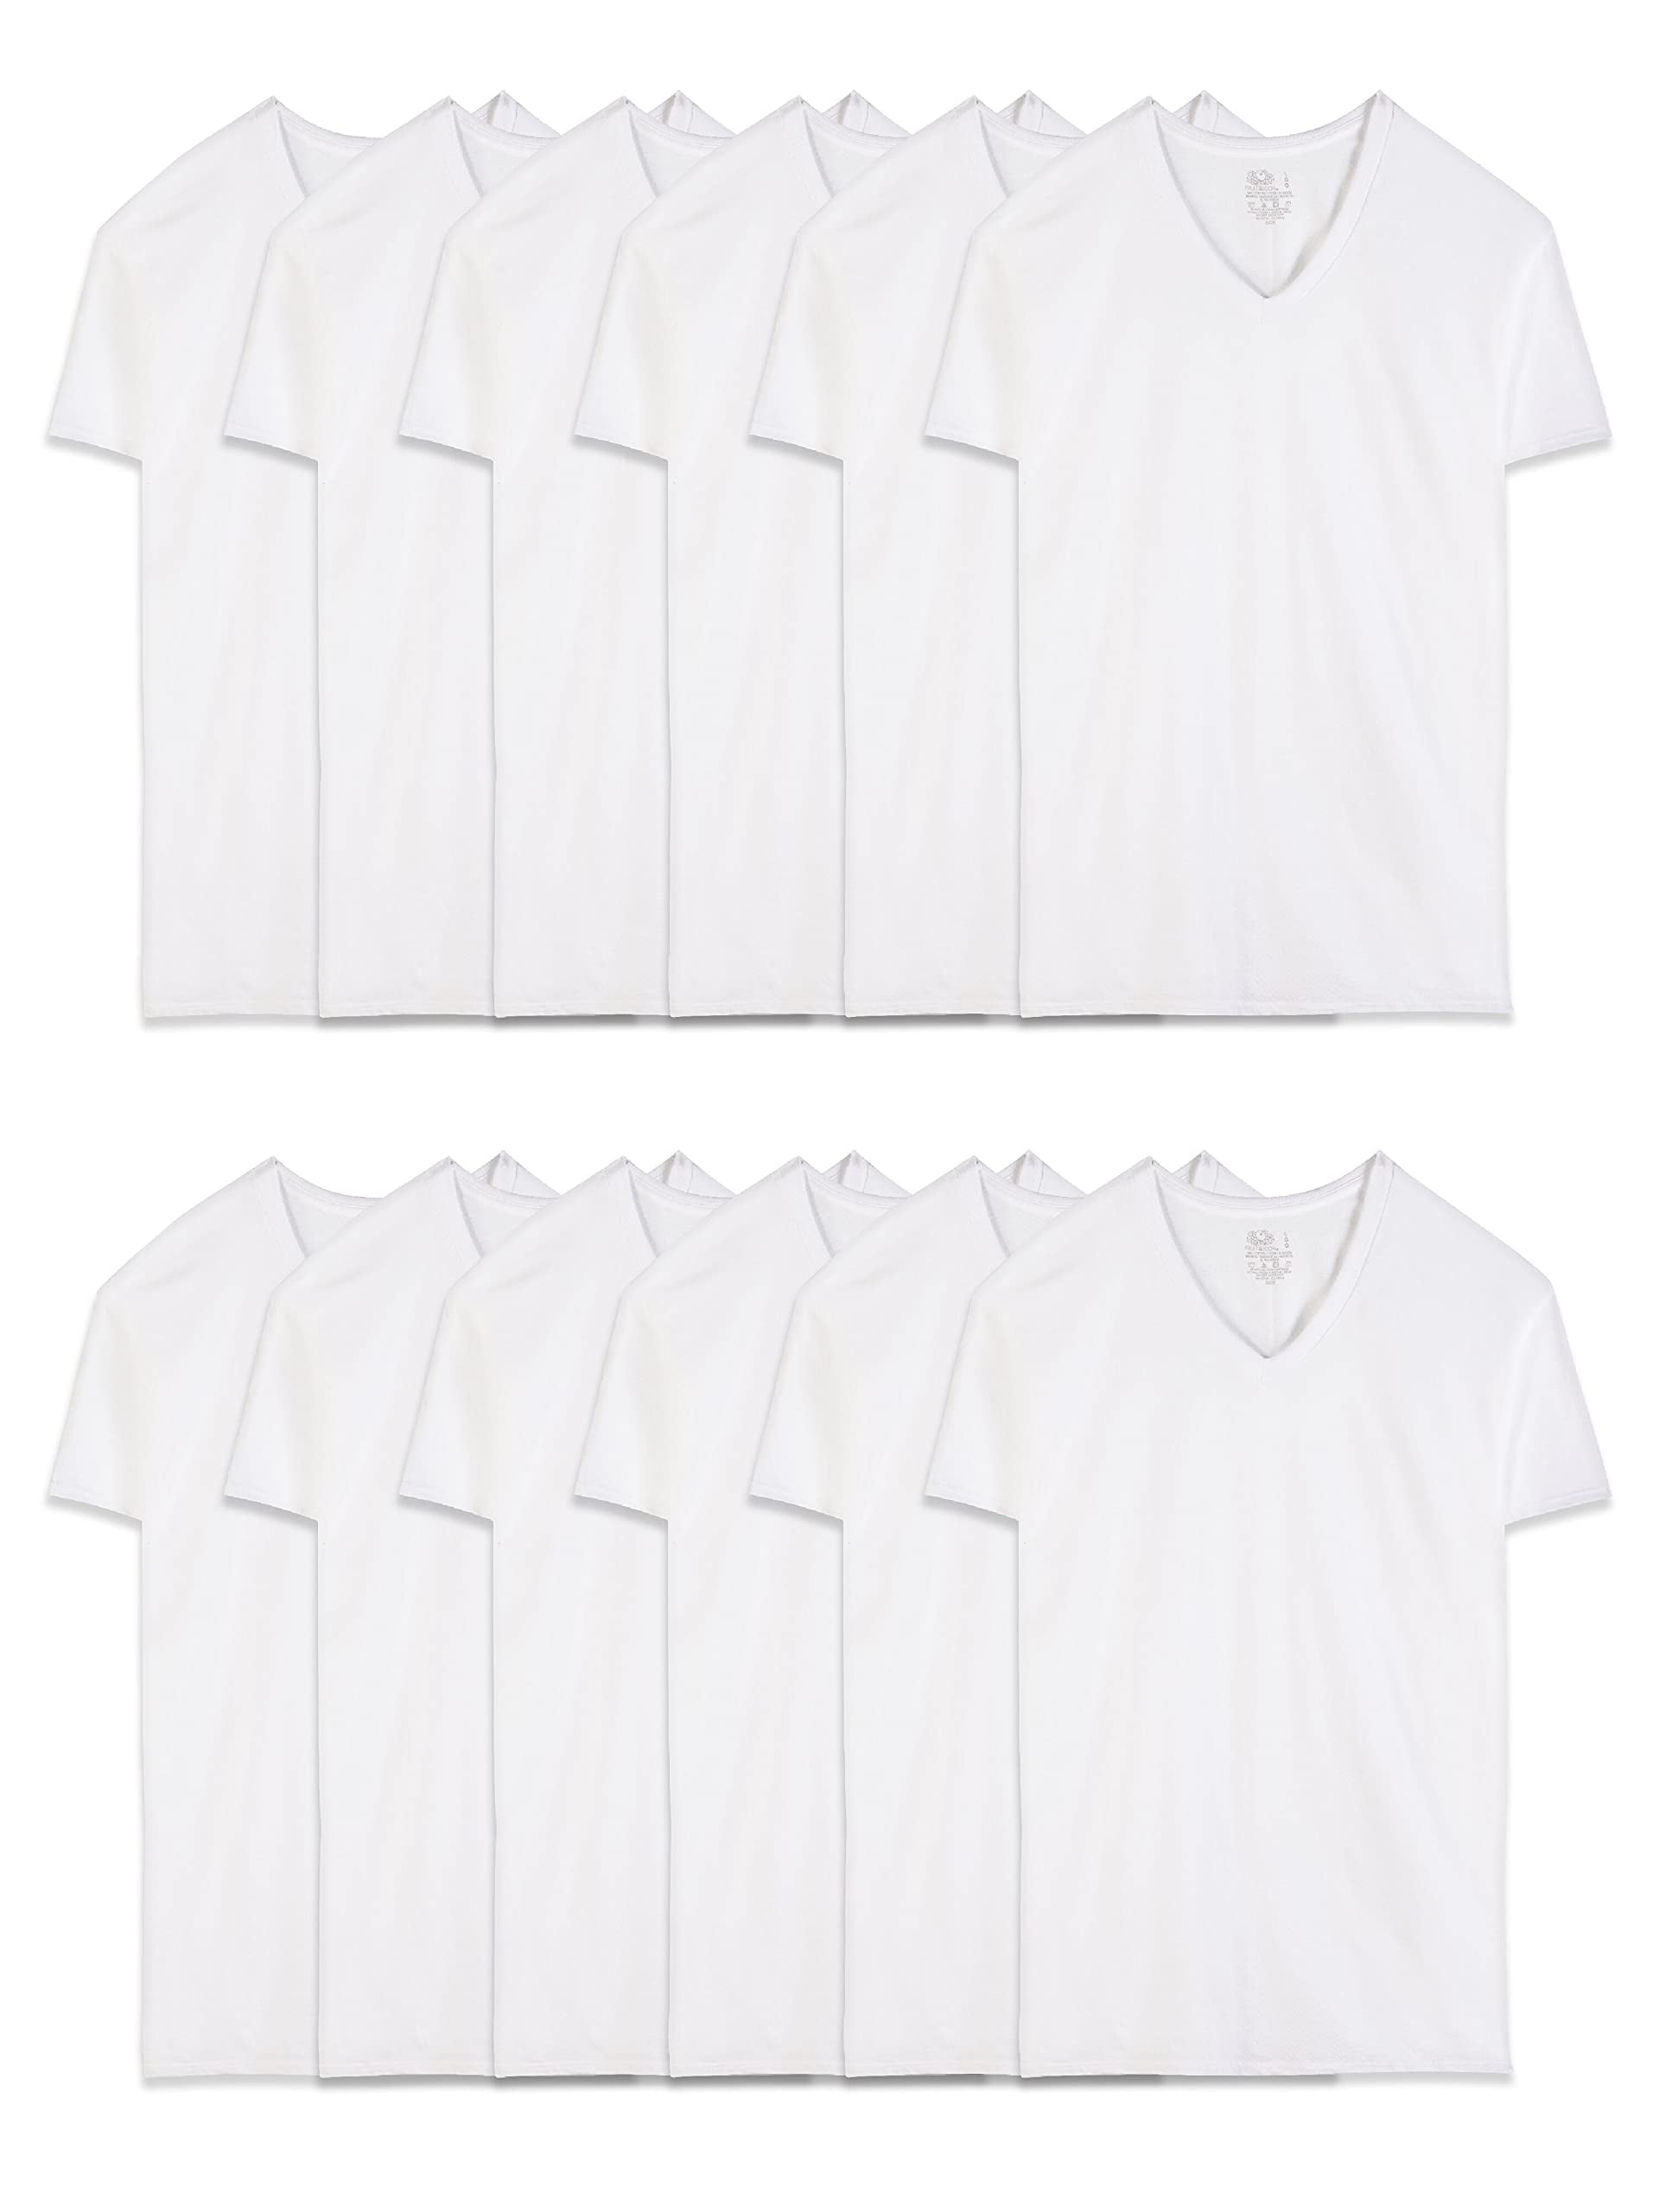 Fruit of the Loom Men's Eversoft Cotton Stay Tucked V-Neck T-Shirt, Classic  Fit-White-12 Pack, Medium 